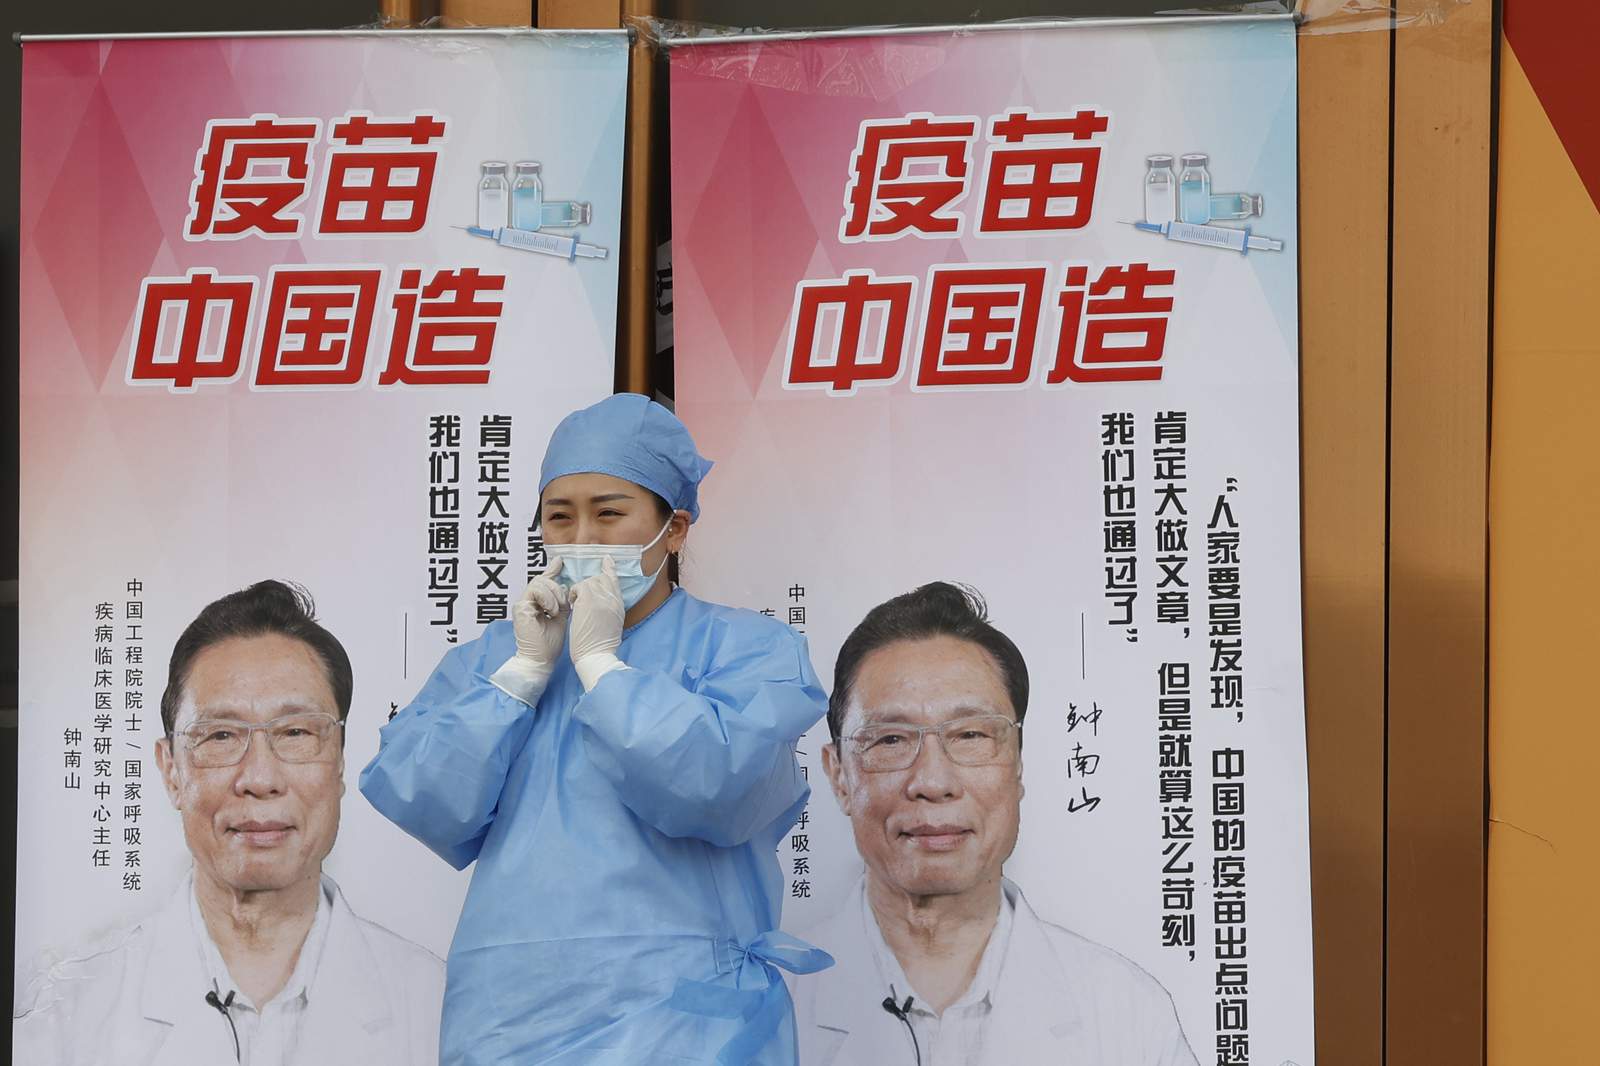 Top Chinese official admits vaccines have low effectiveness